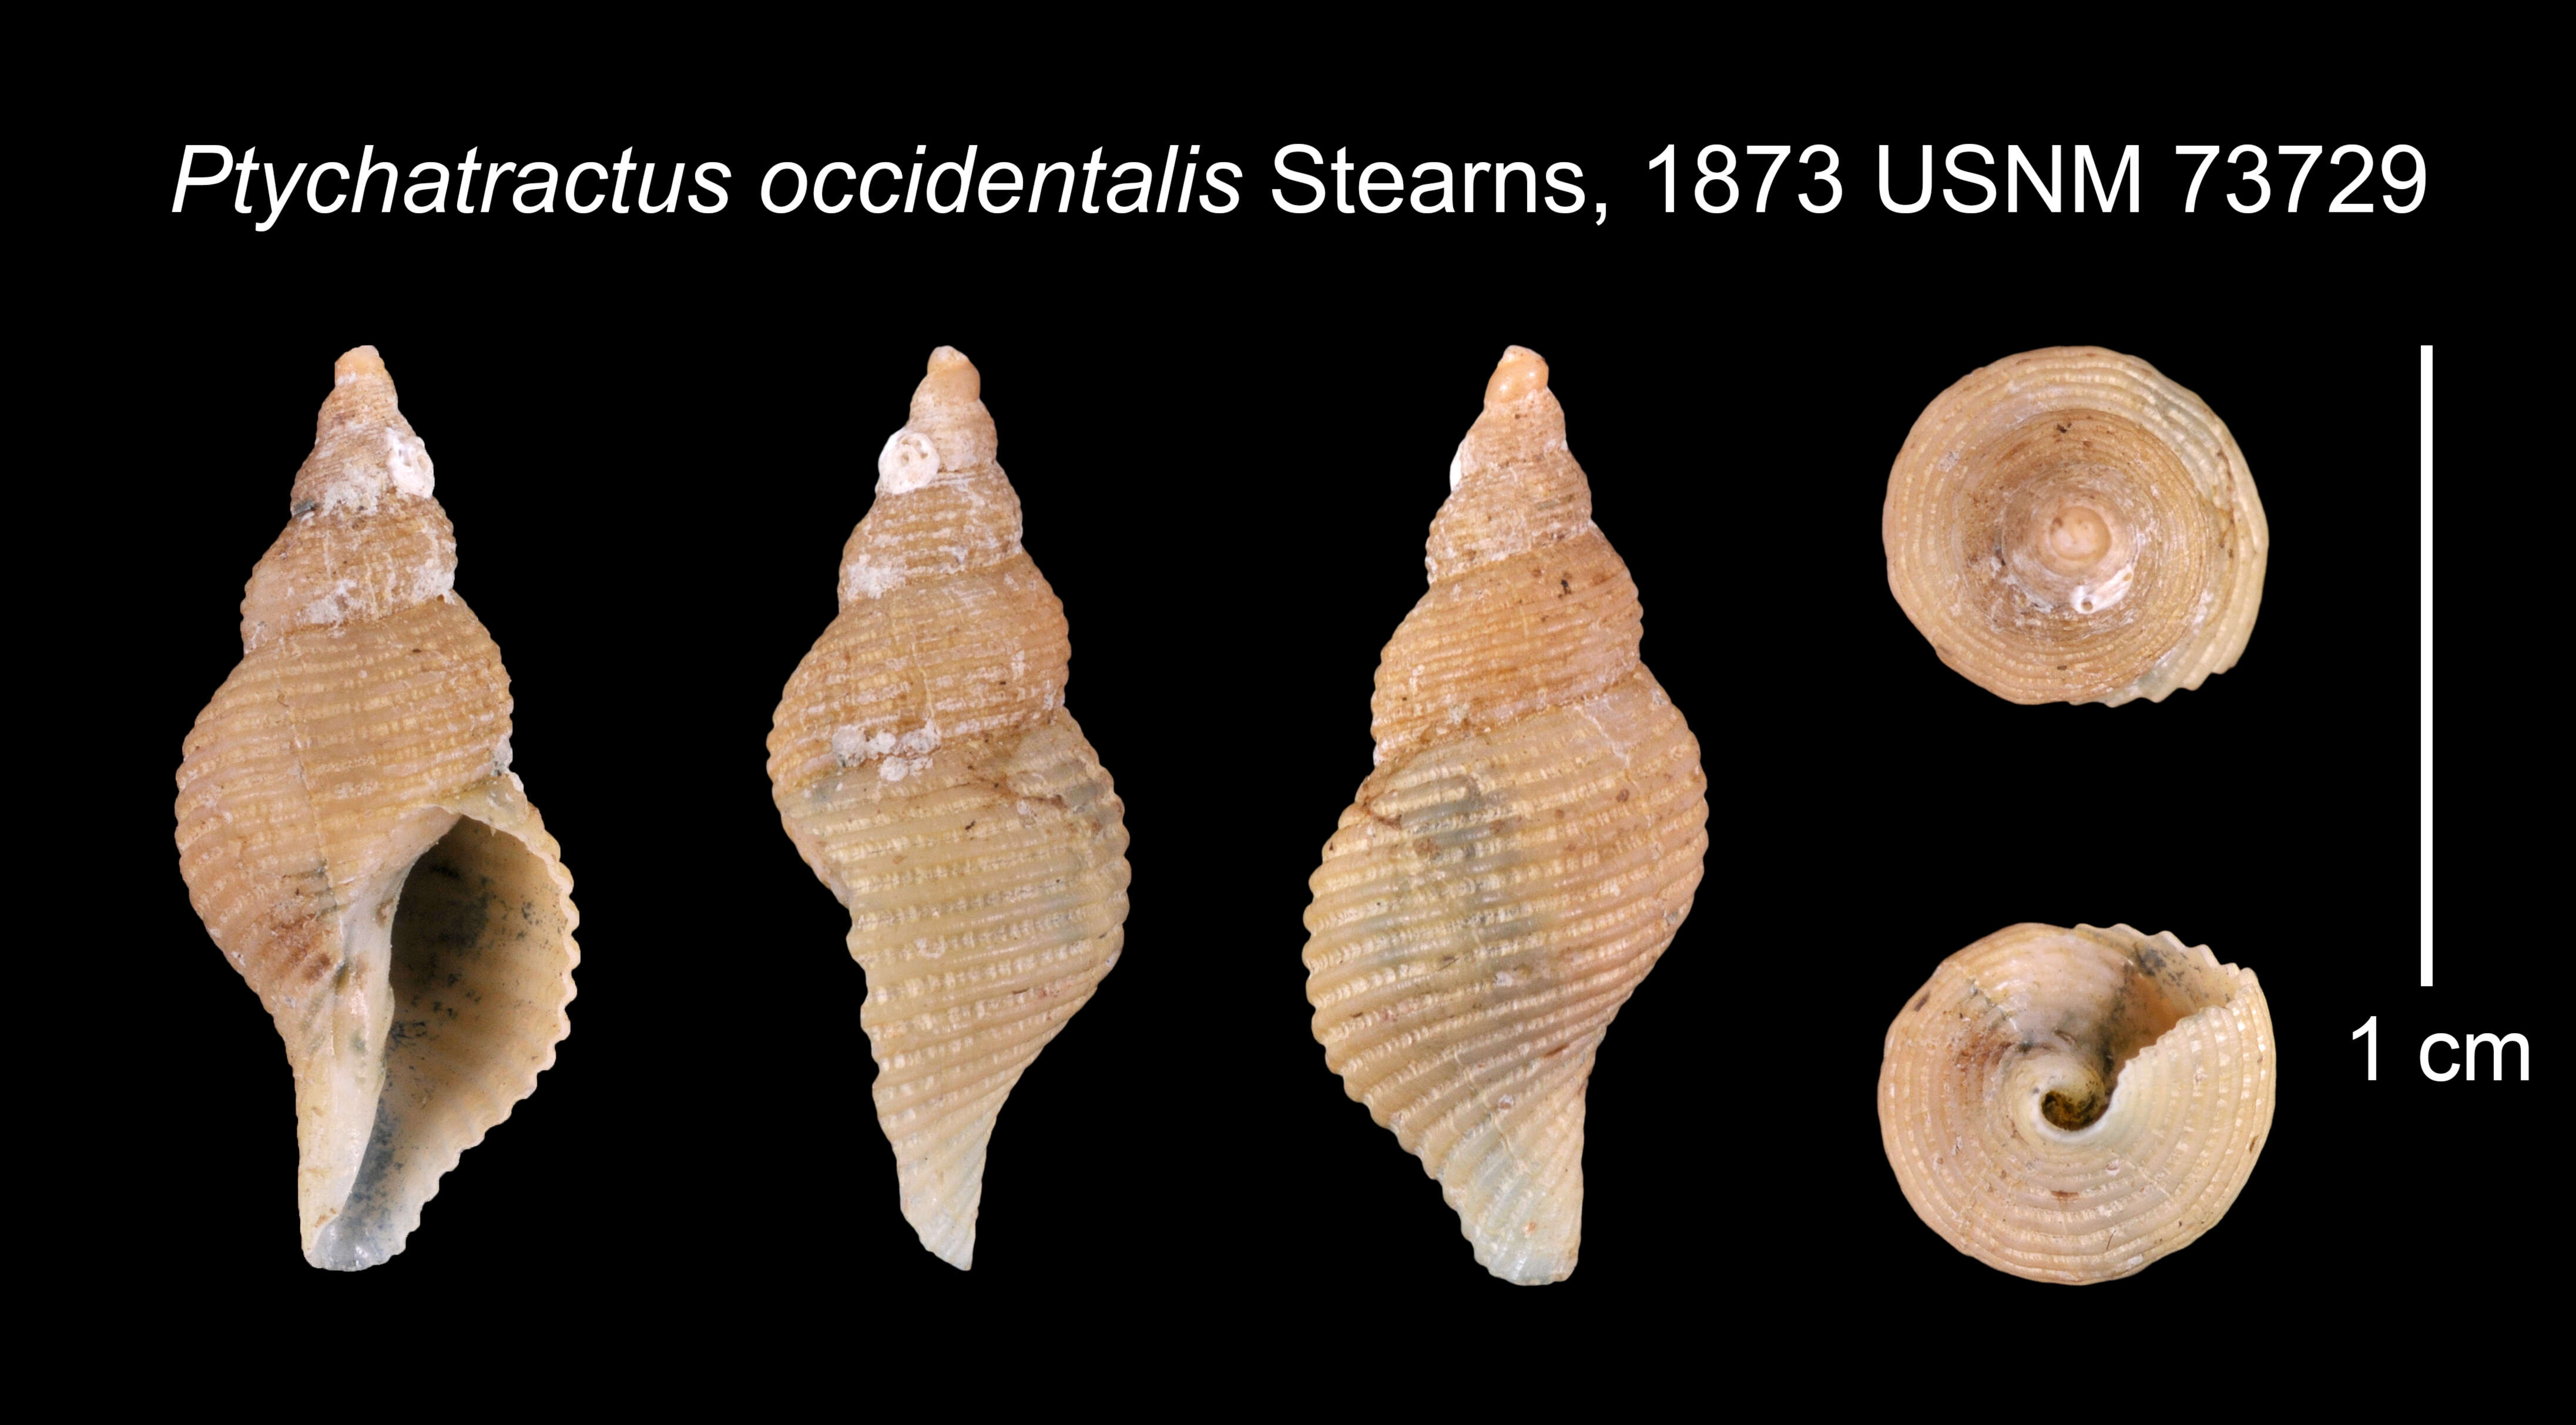 Image of Ptychatractus occidentalis Stearns 1871